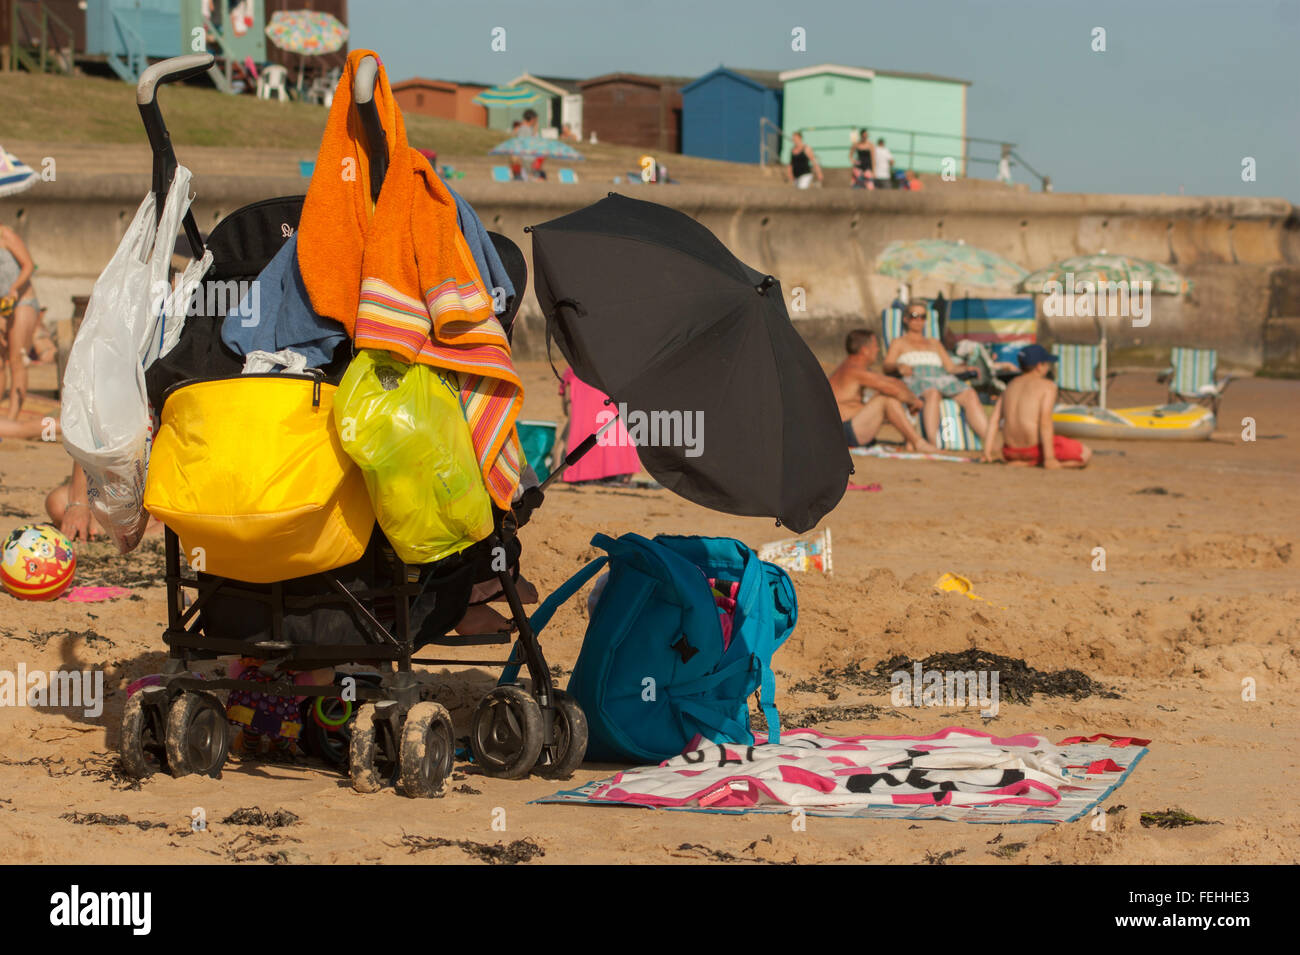 View of an overladen pushchair on a day out, Seen on the beach at Walton on the Naze , Essex, UK. Stock Photo